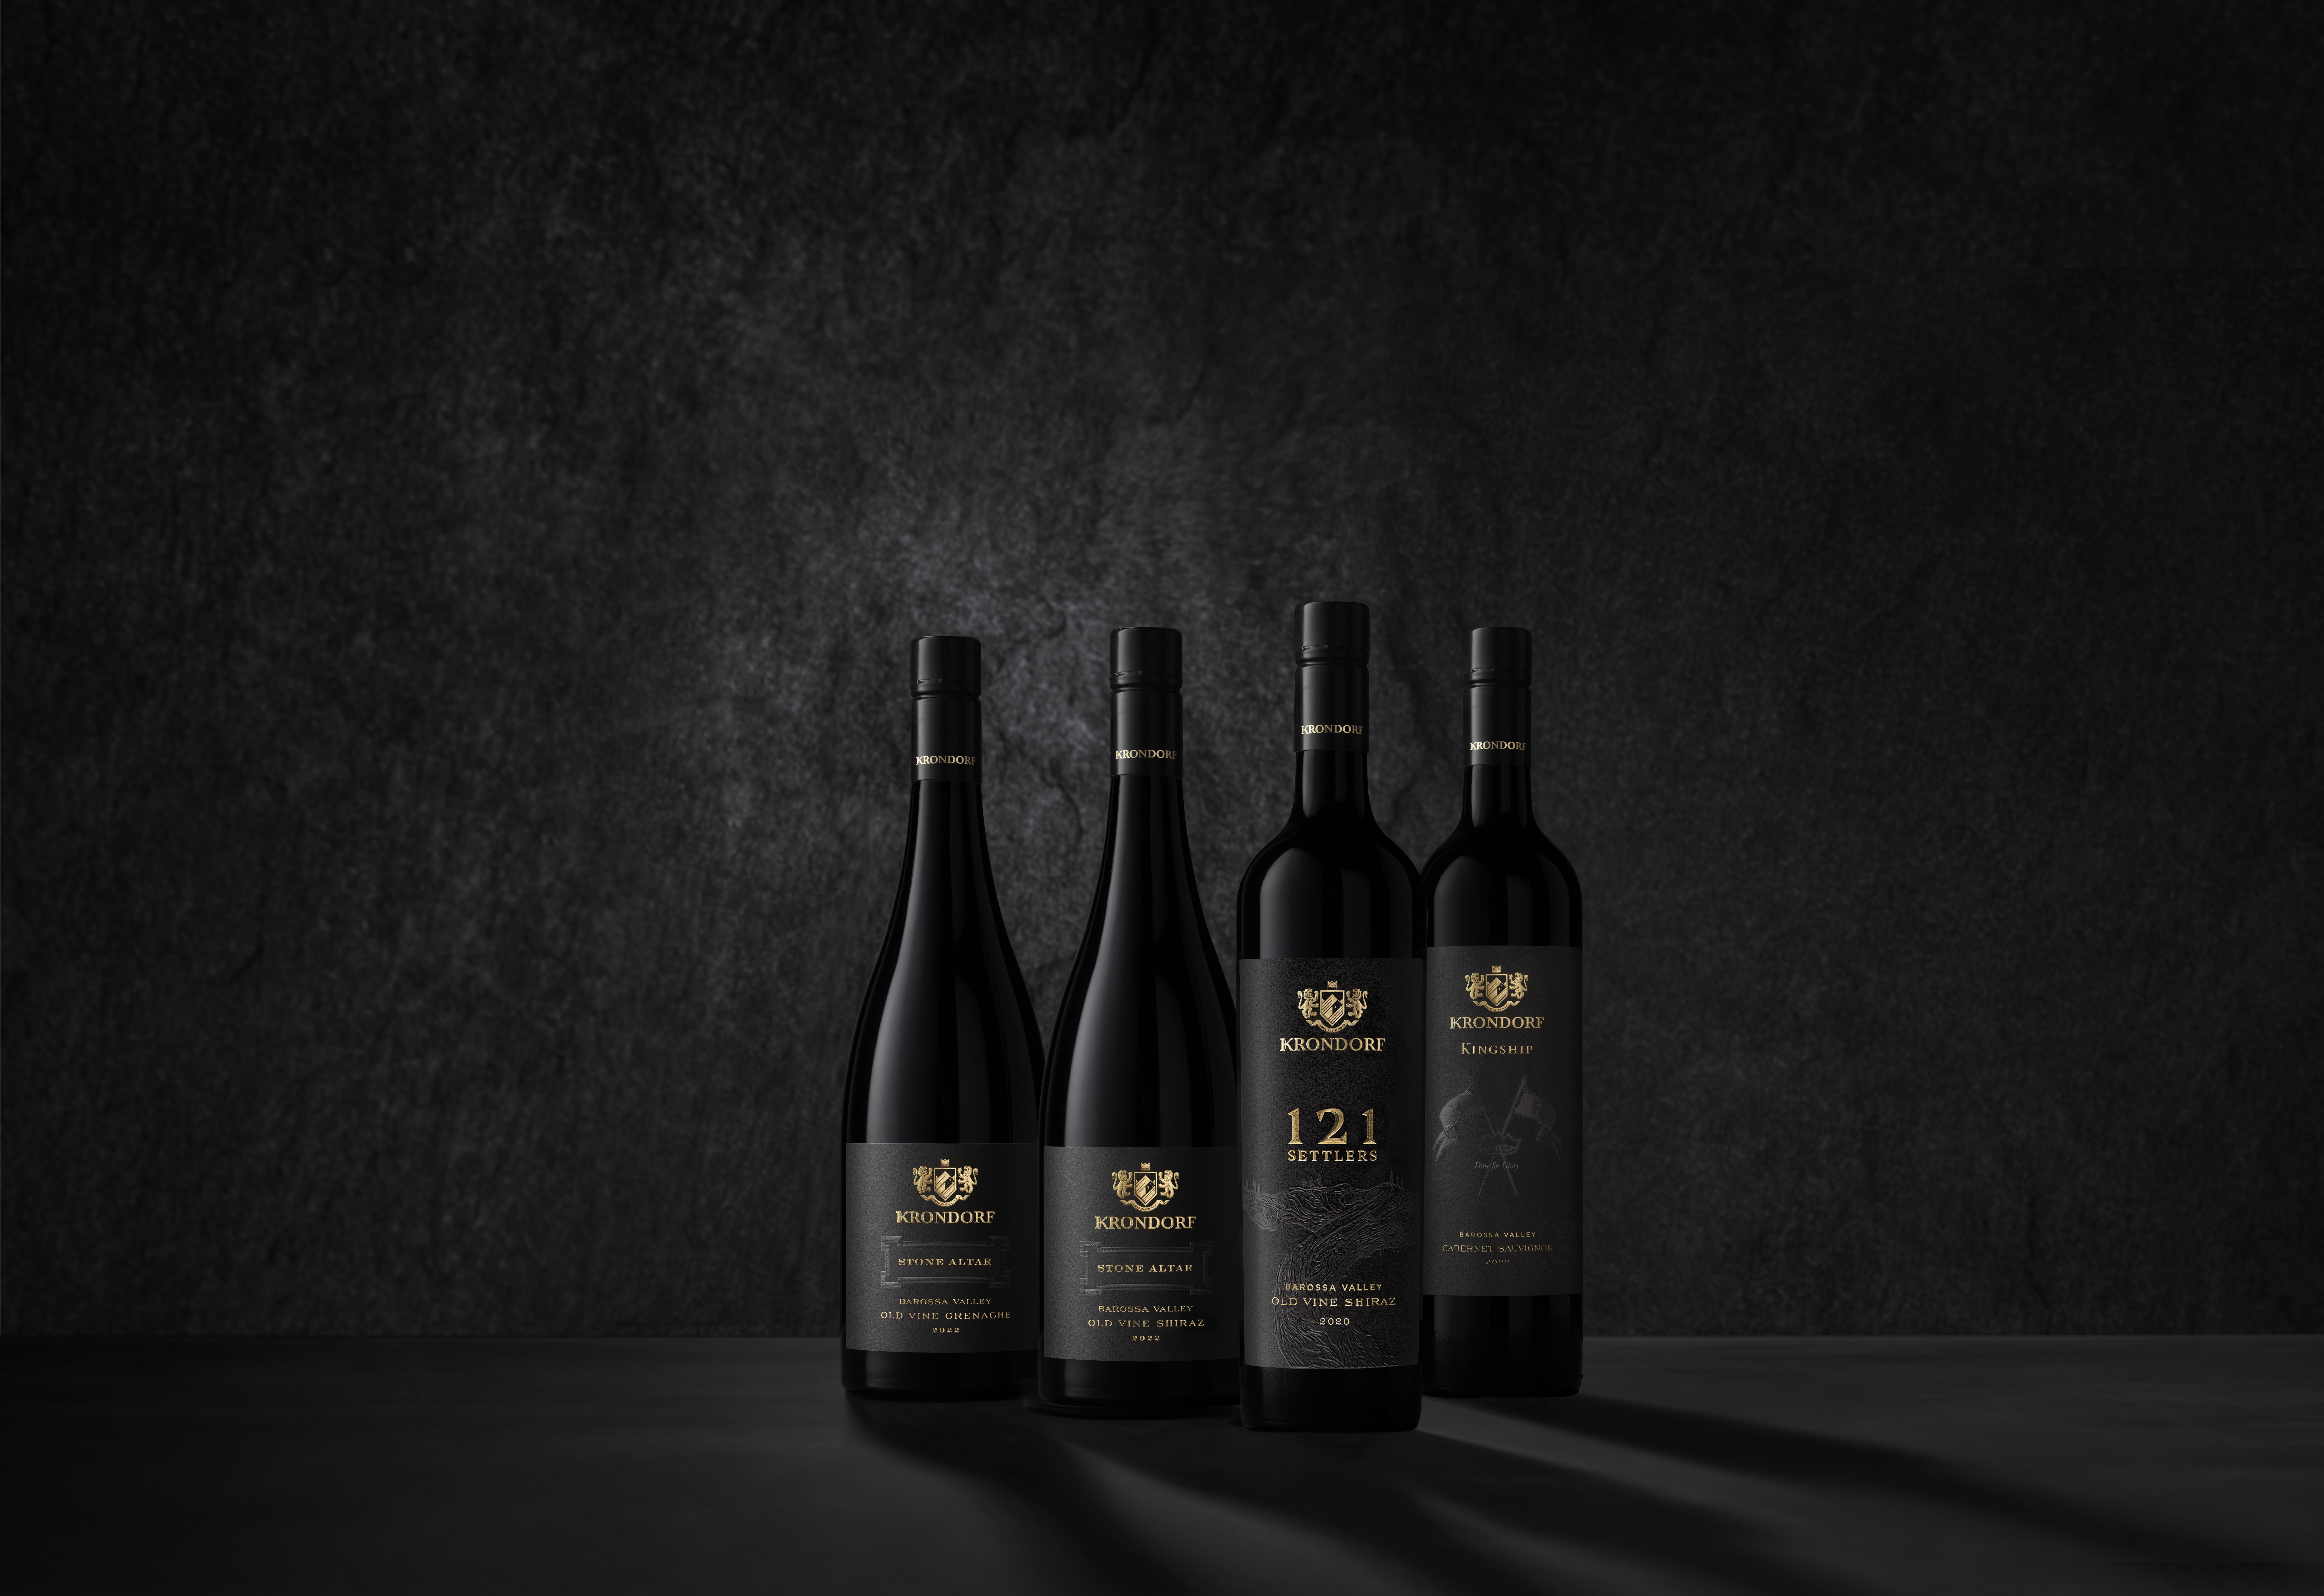 A collection of four red wine bottles from Krondorf, Barossa, with black labels sit against a black background.